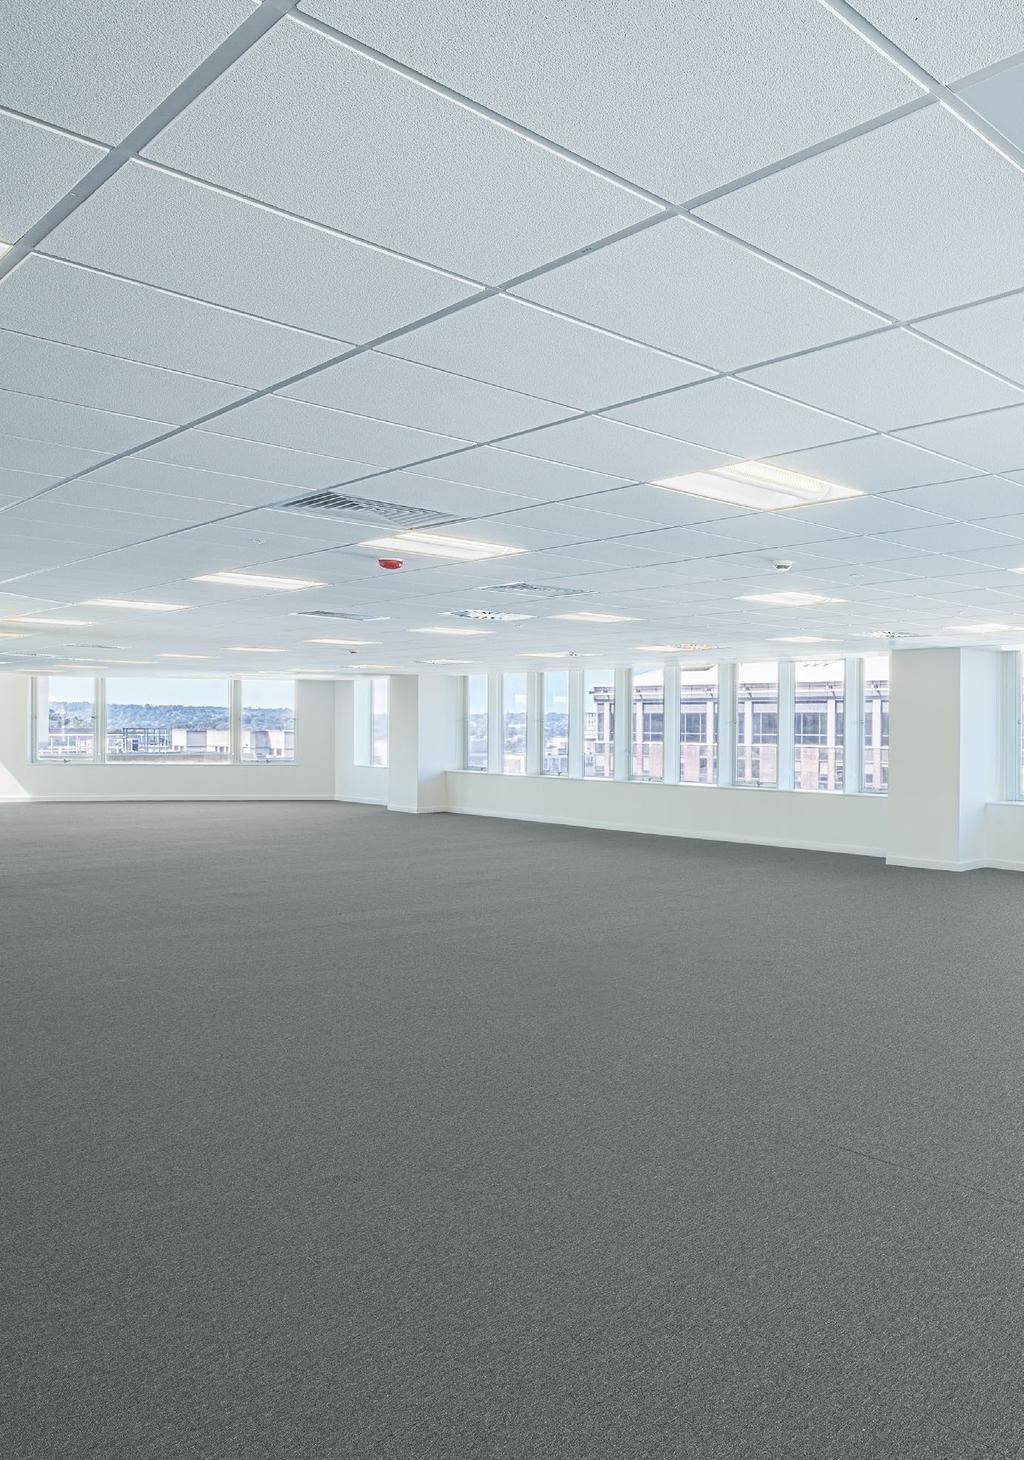 THE STANDARD FLOOR PLATE WITHIN ONECROYDON IS 7,583 SQ FT, WHICH CAN BE SPLIT